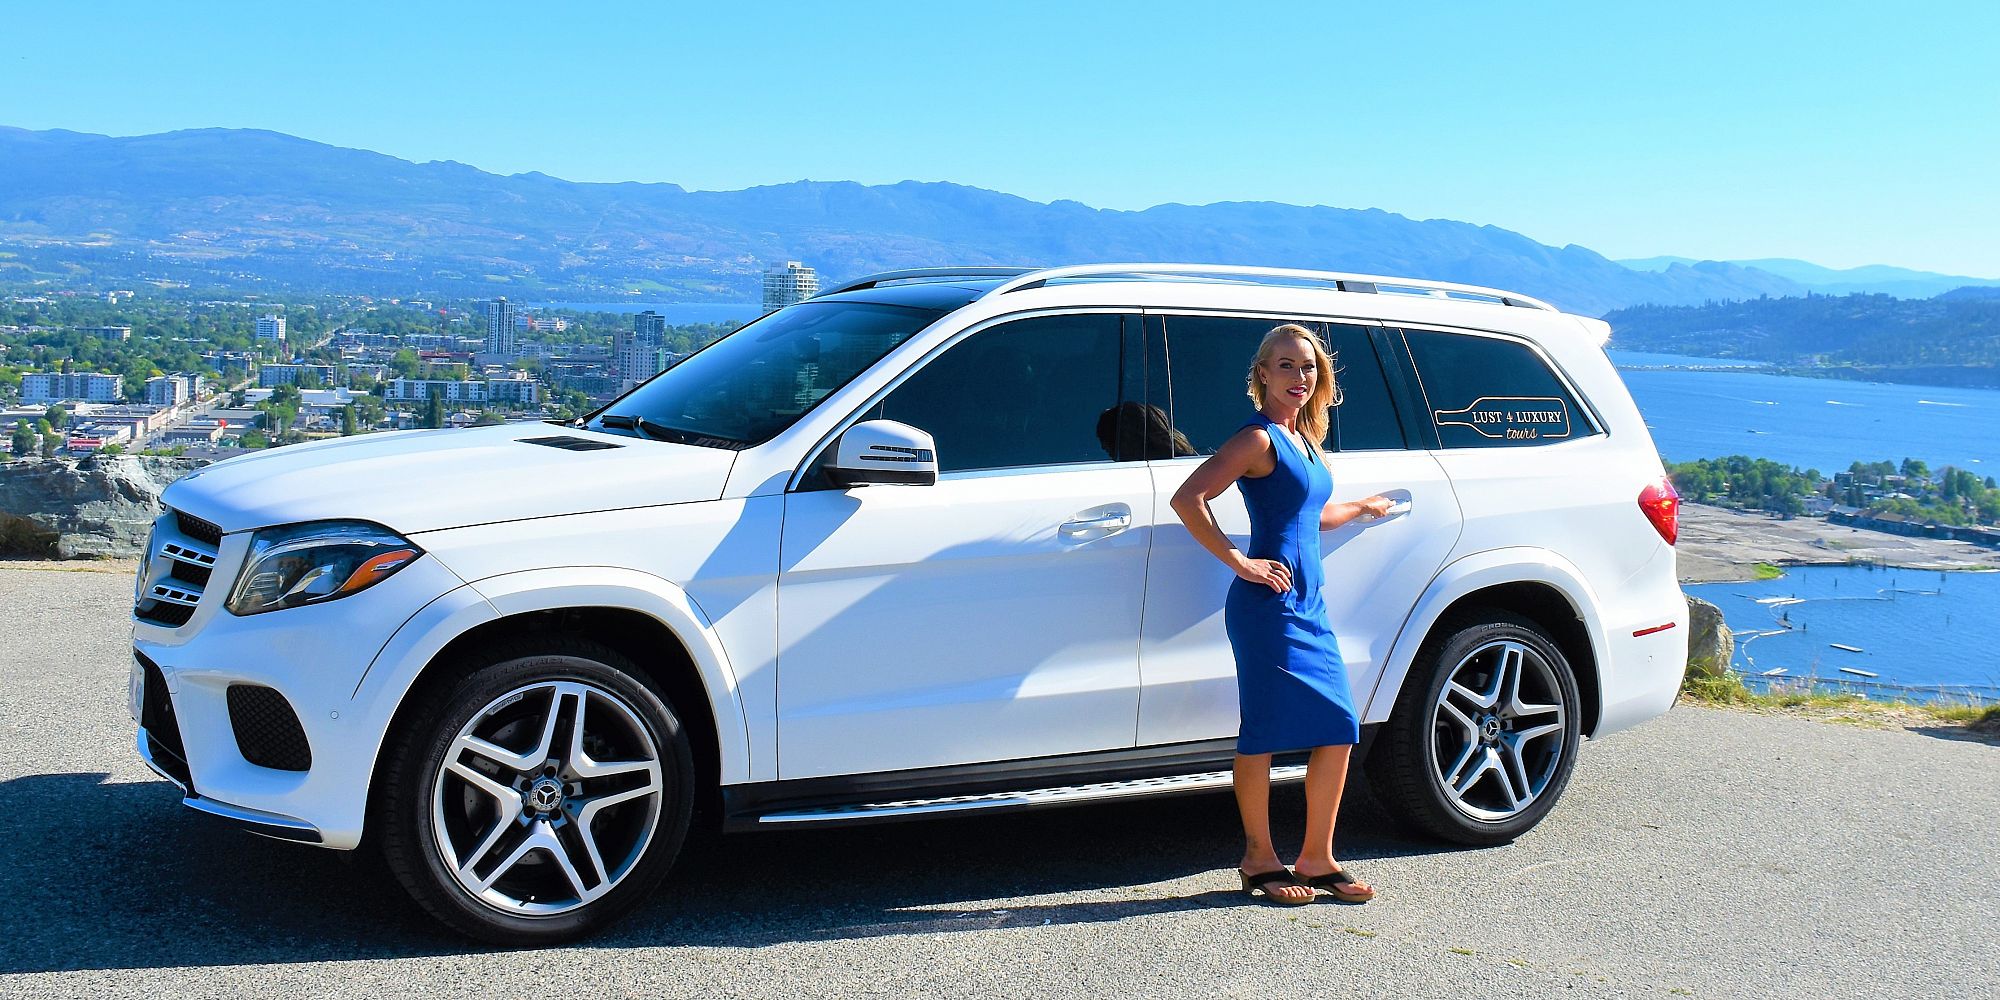 Stacey Lust With The Best Mercedes-Benz Wine Touring Vehicle In Okanagan Falls, BC